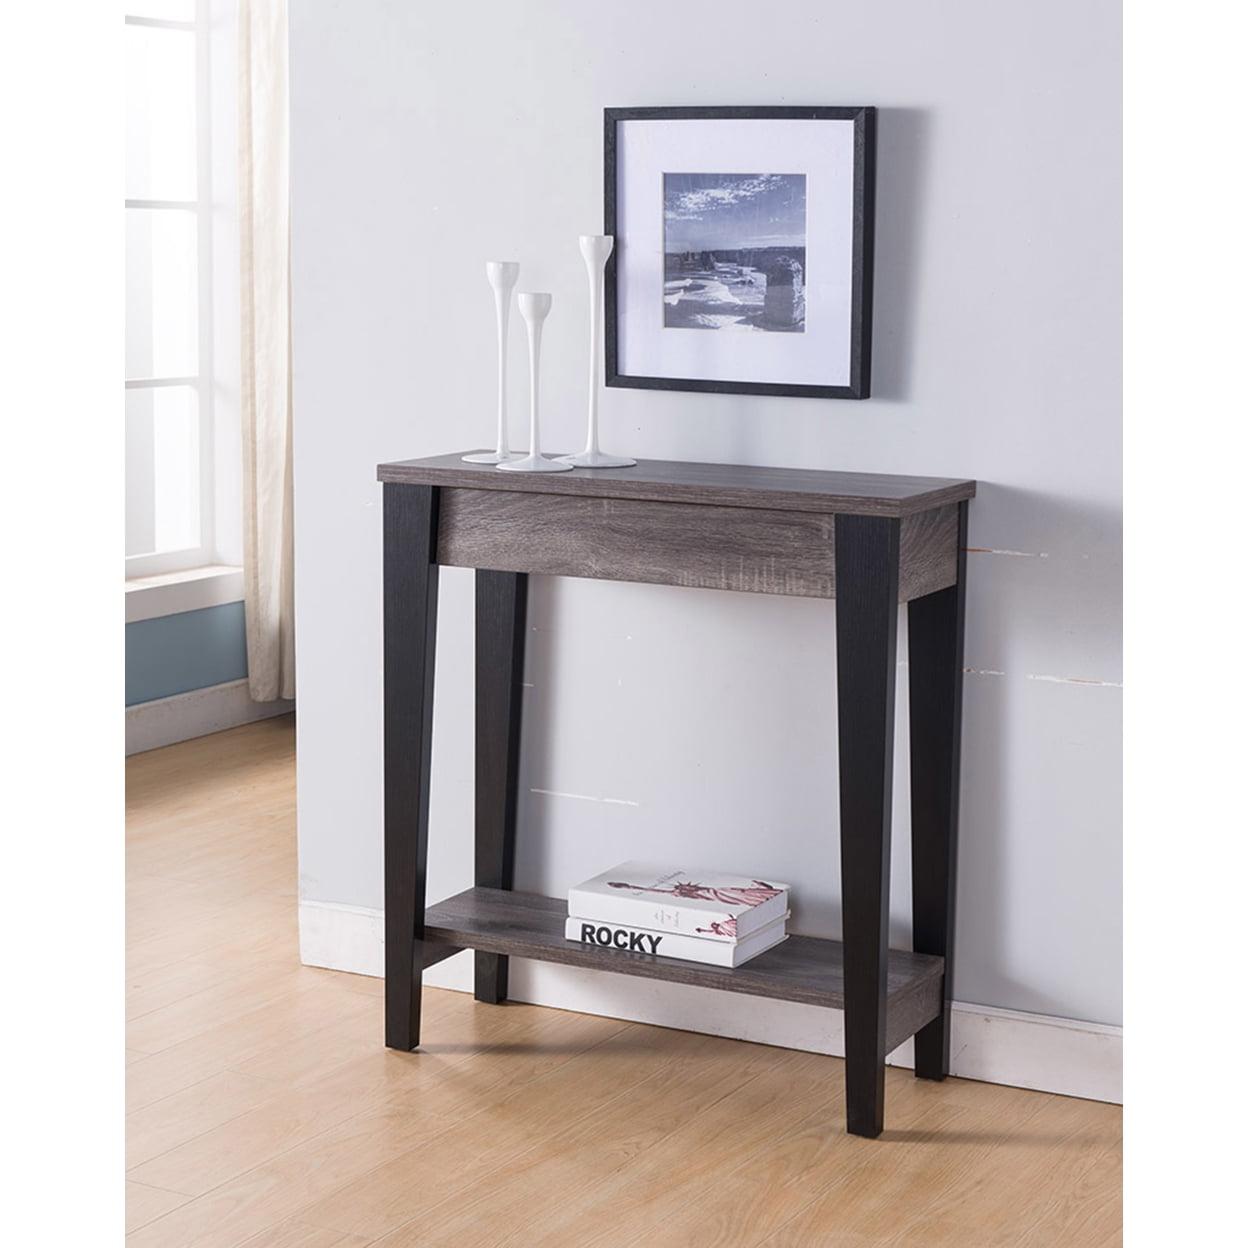 Elegant Black and Gray Solid Wood Console Table with Storage Shelf